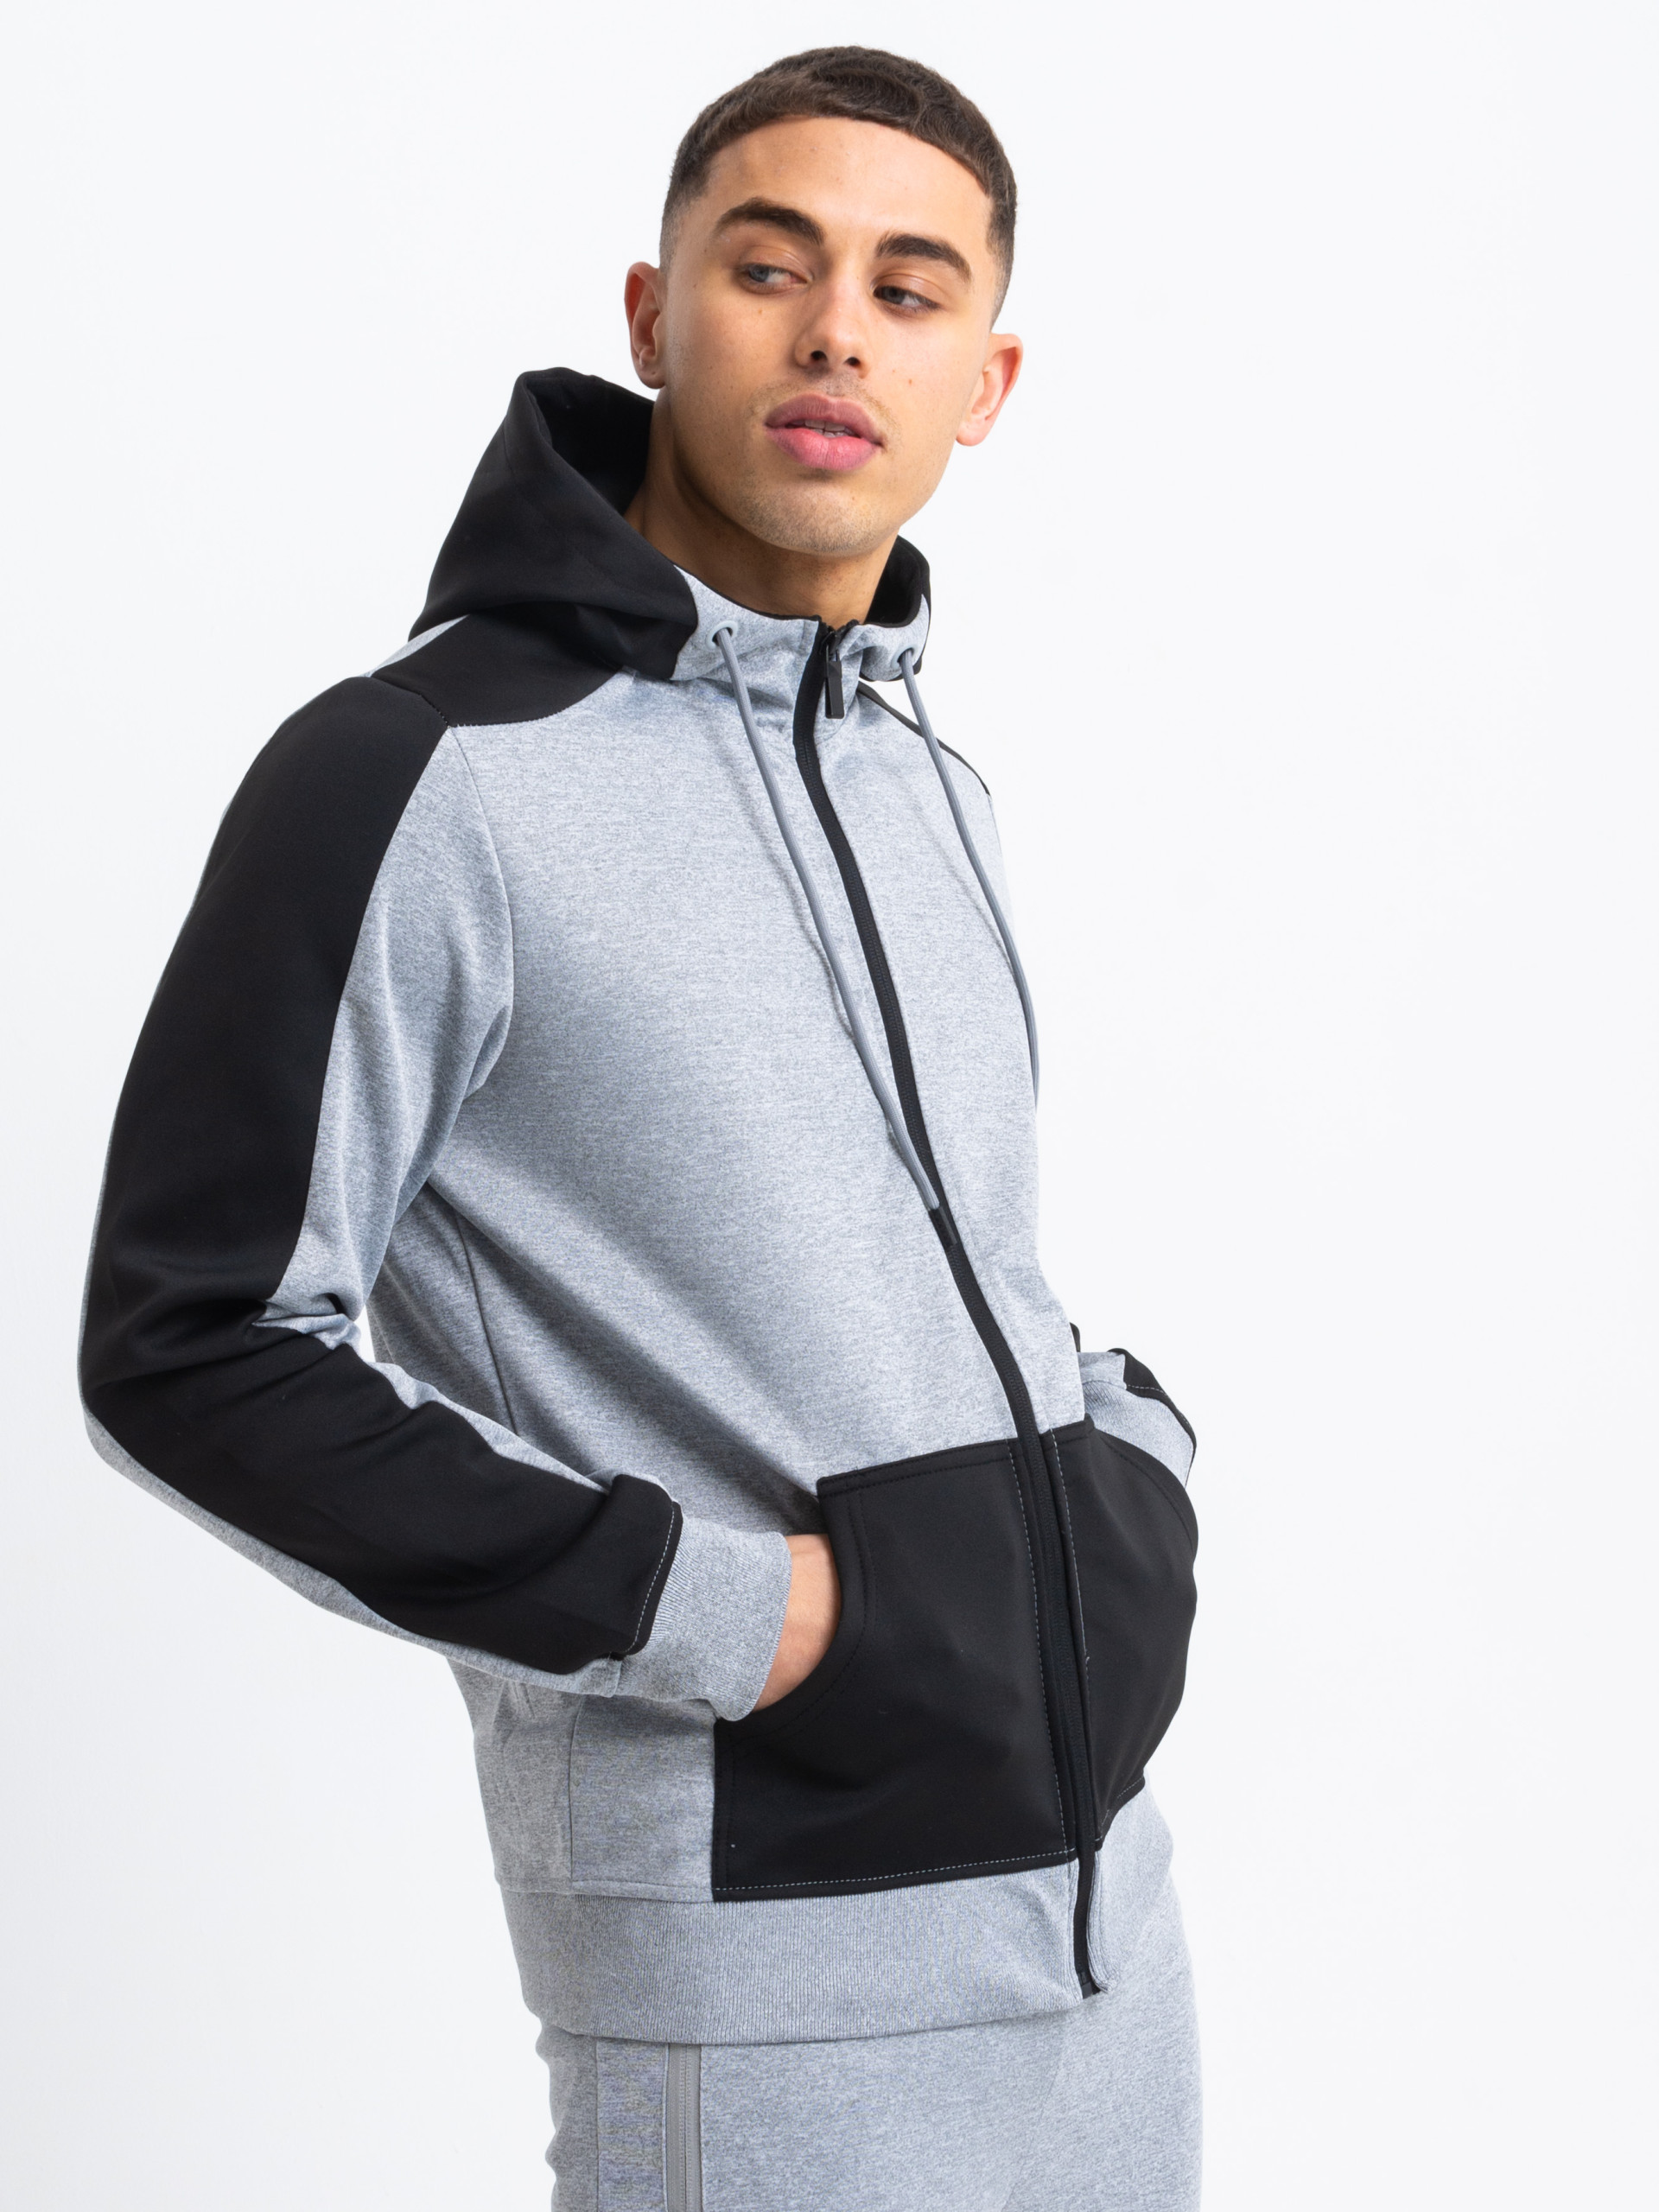 Athletic Tracksuit in Grey | Men's Clothing & Fashion | HisColumn